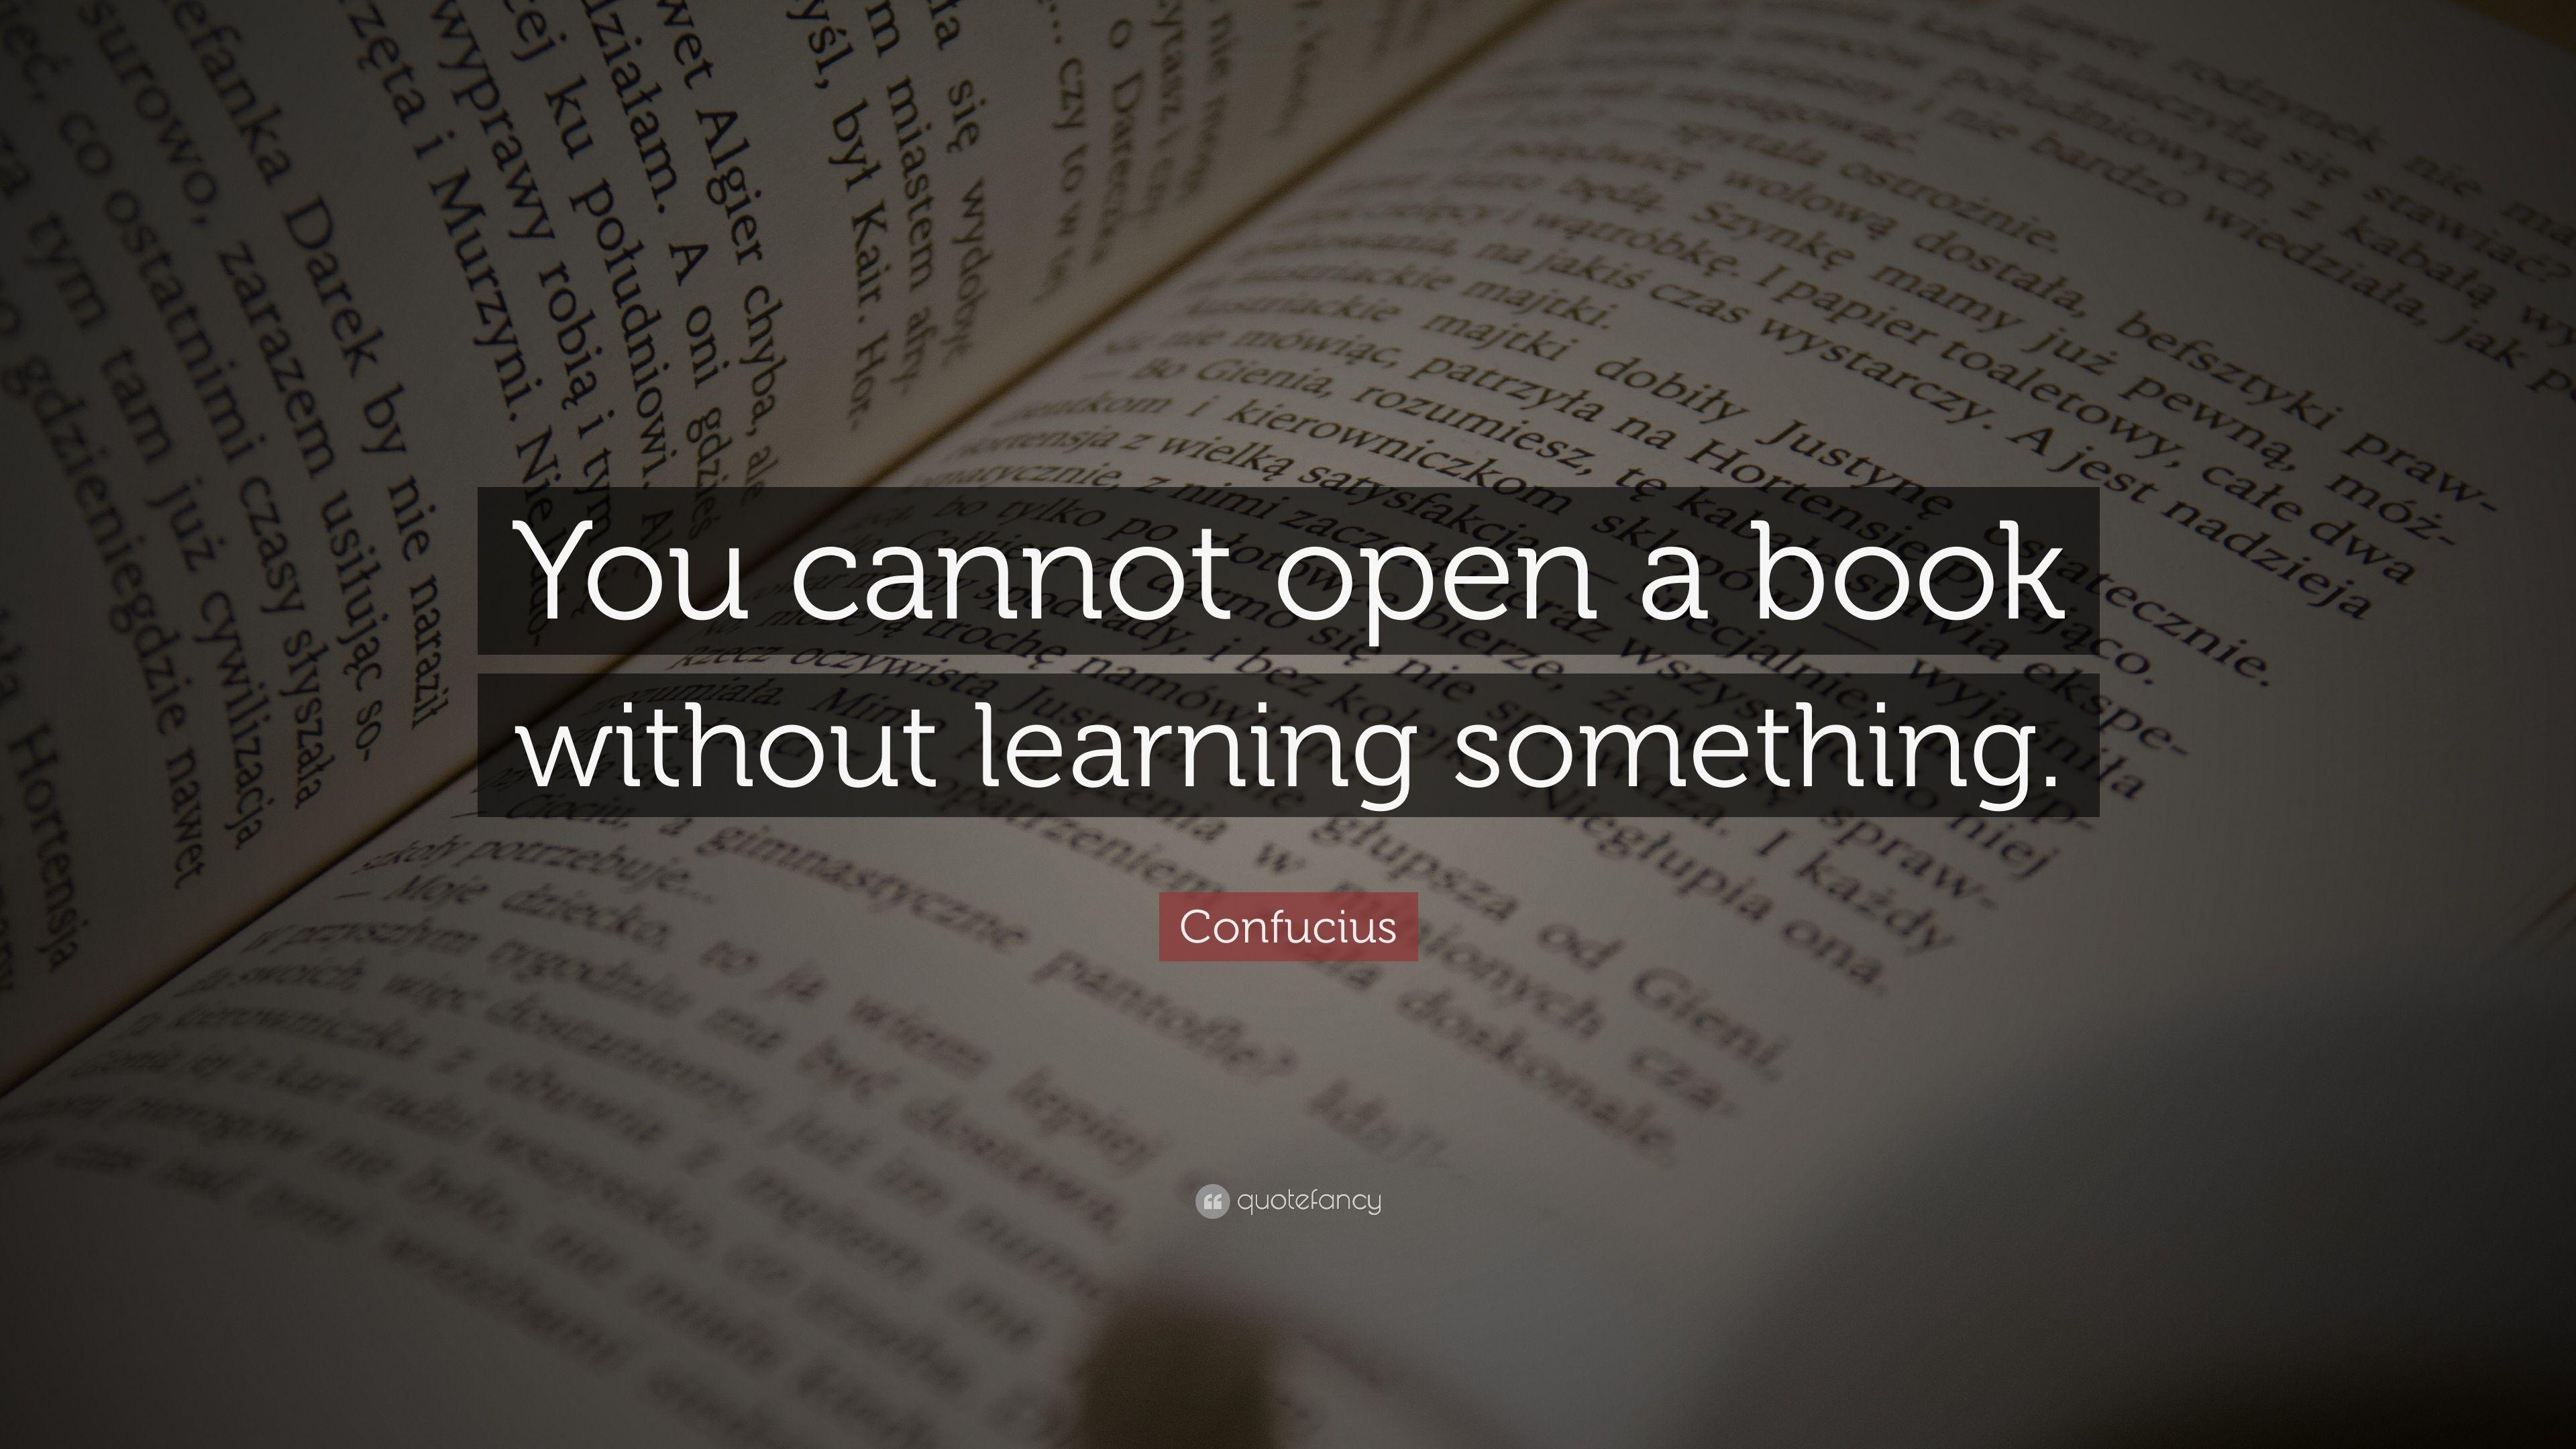 Confucius Quote: “You cannot open a book without learning something